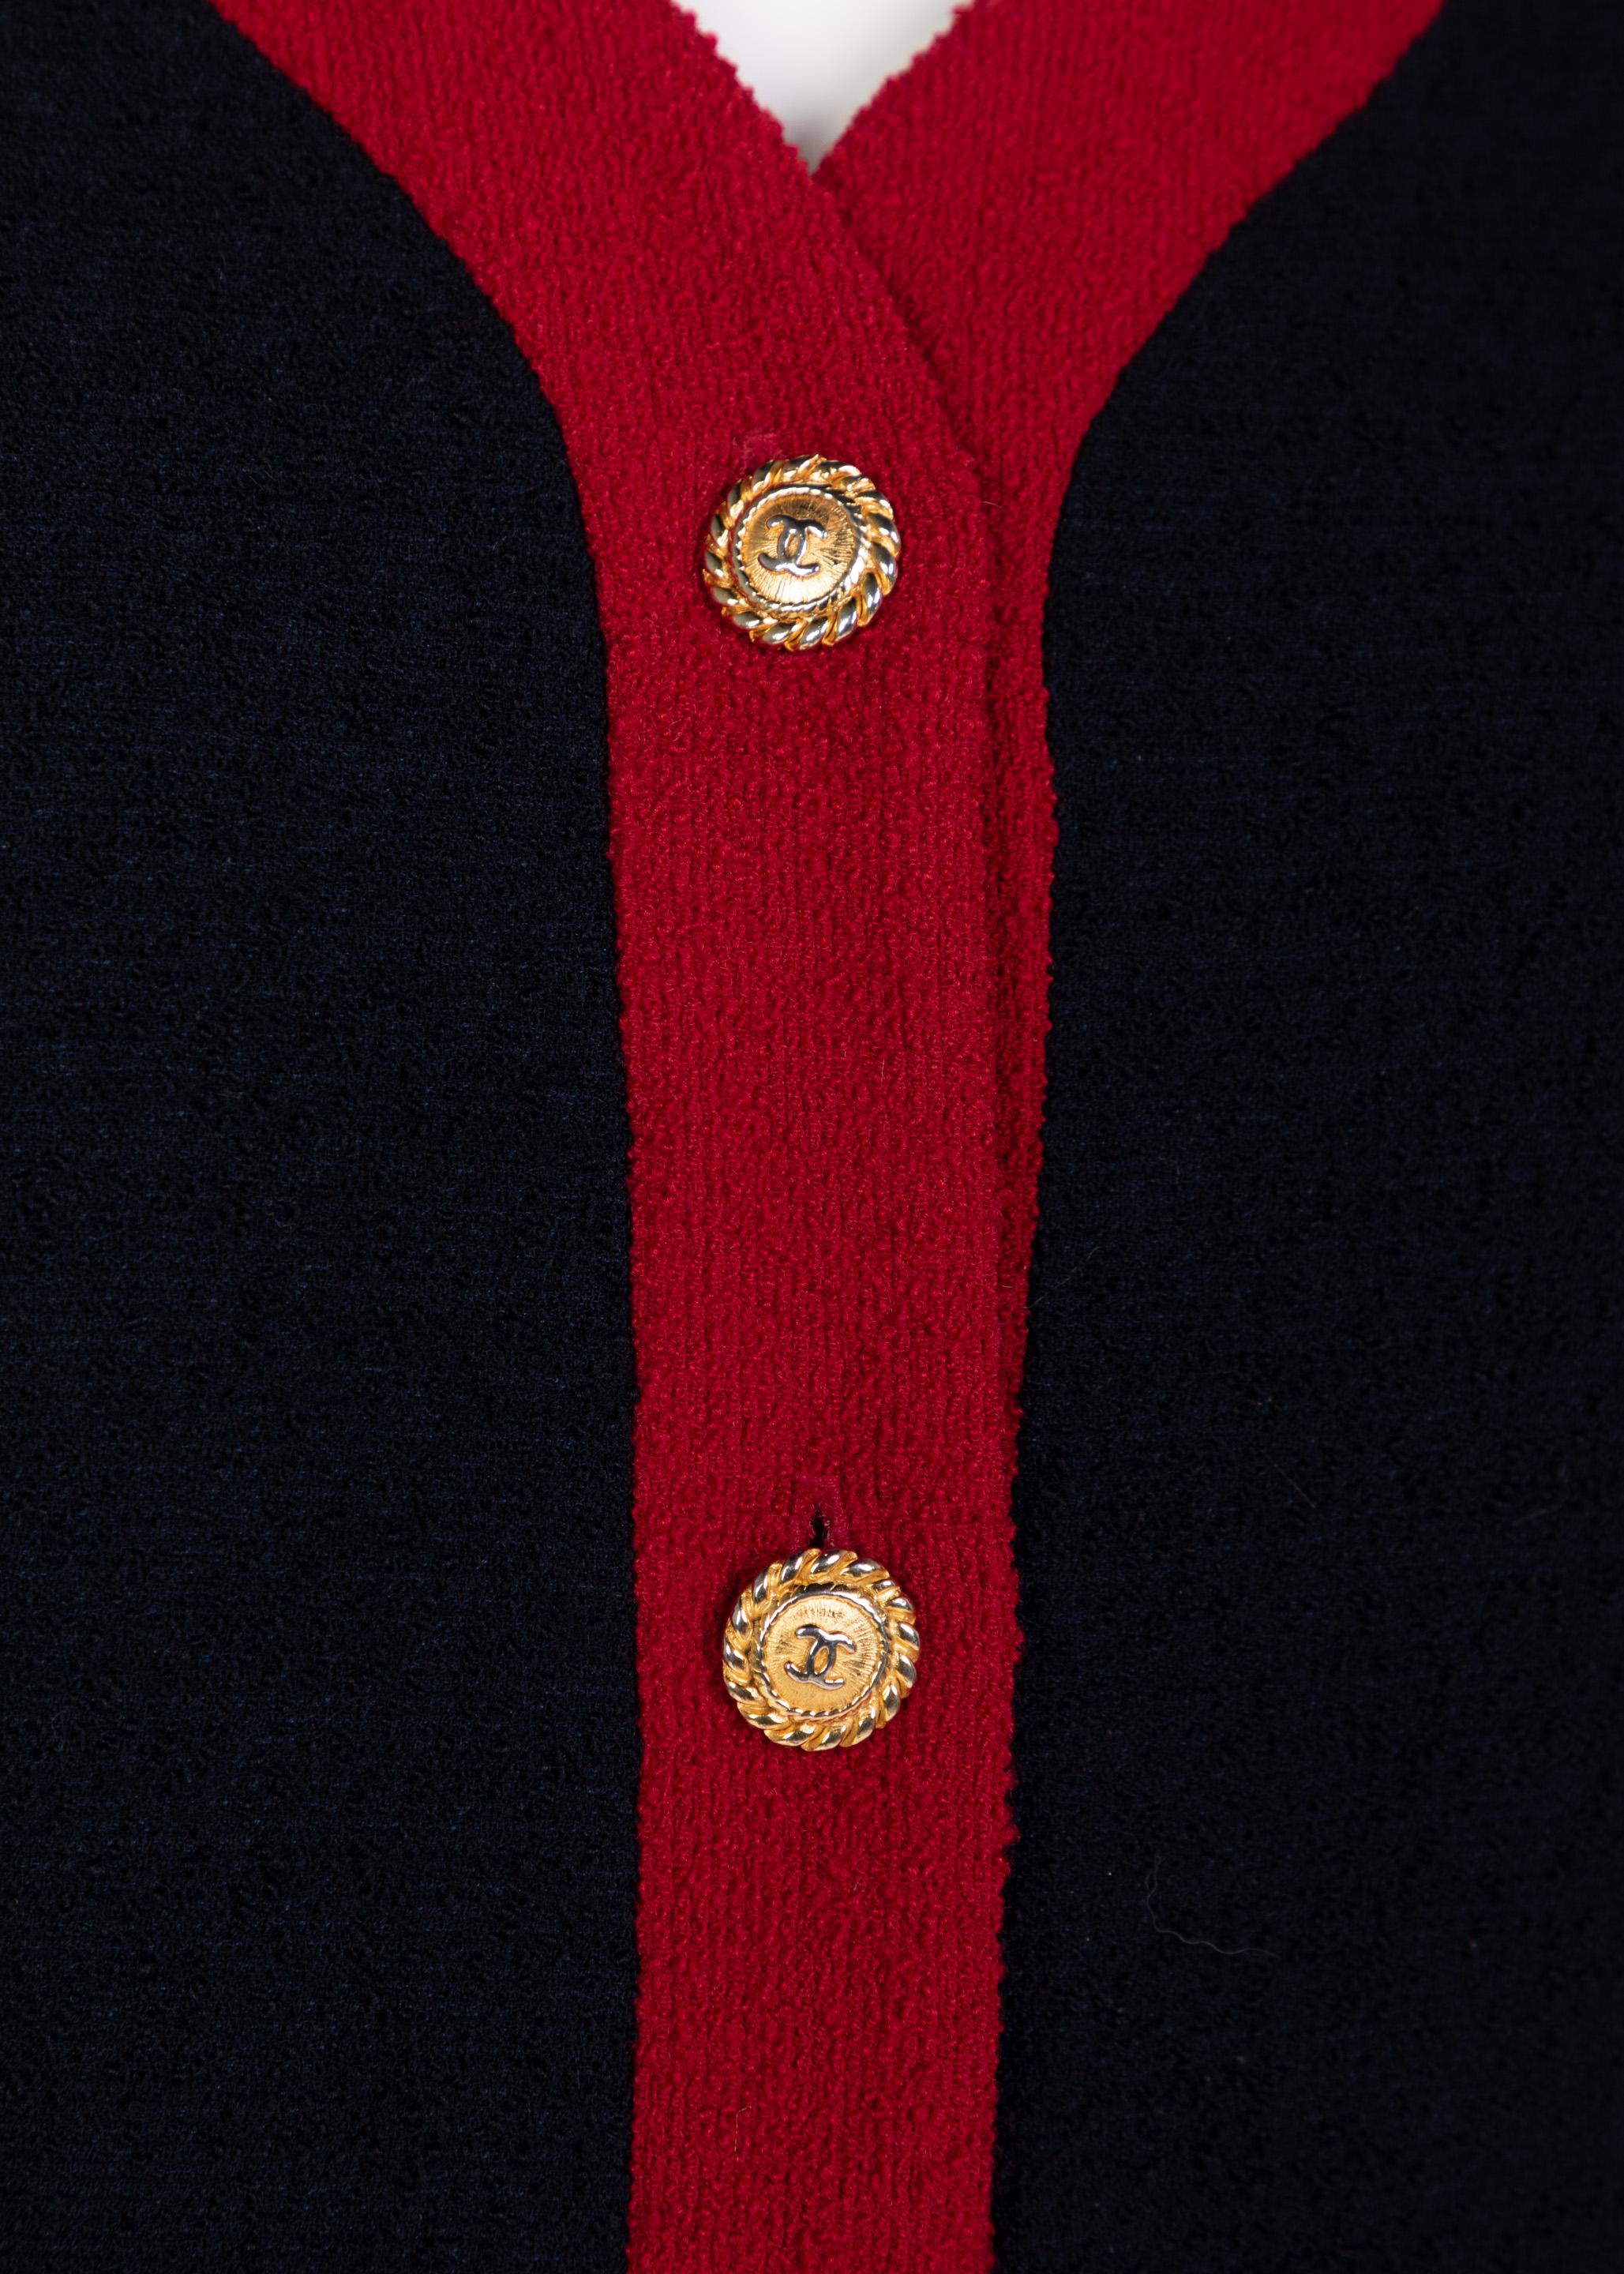 Women's Chanel Navy & Red Boucle Jacket w/ Gold CC Buttons, 1980s